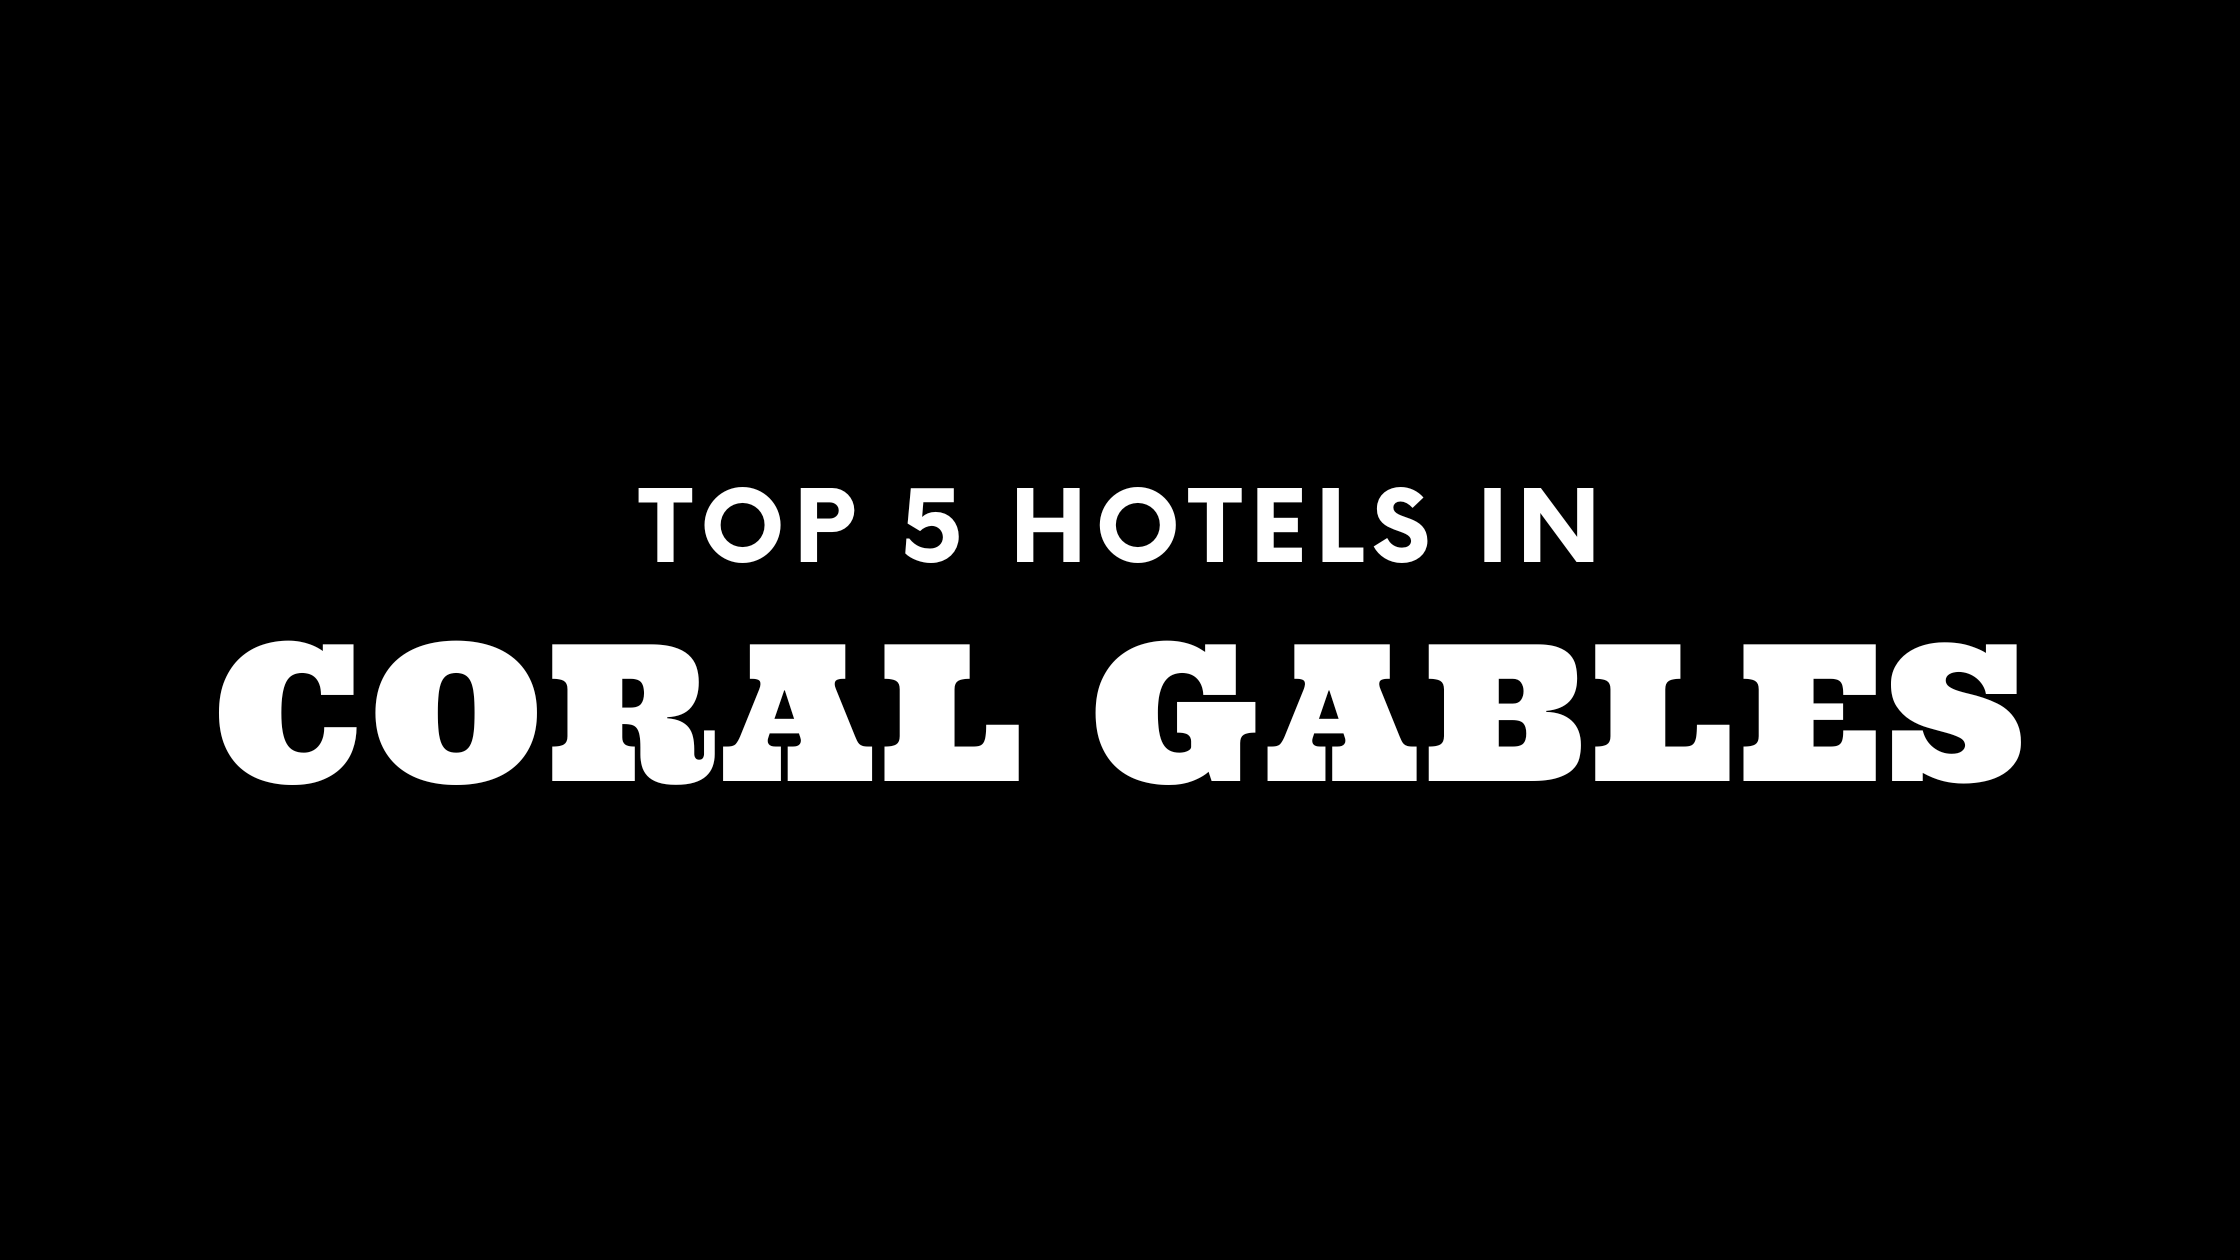 Top 5 Hotels in Coral Gables